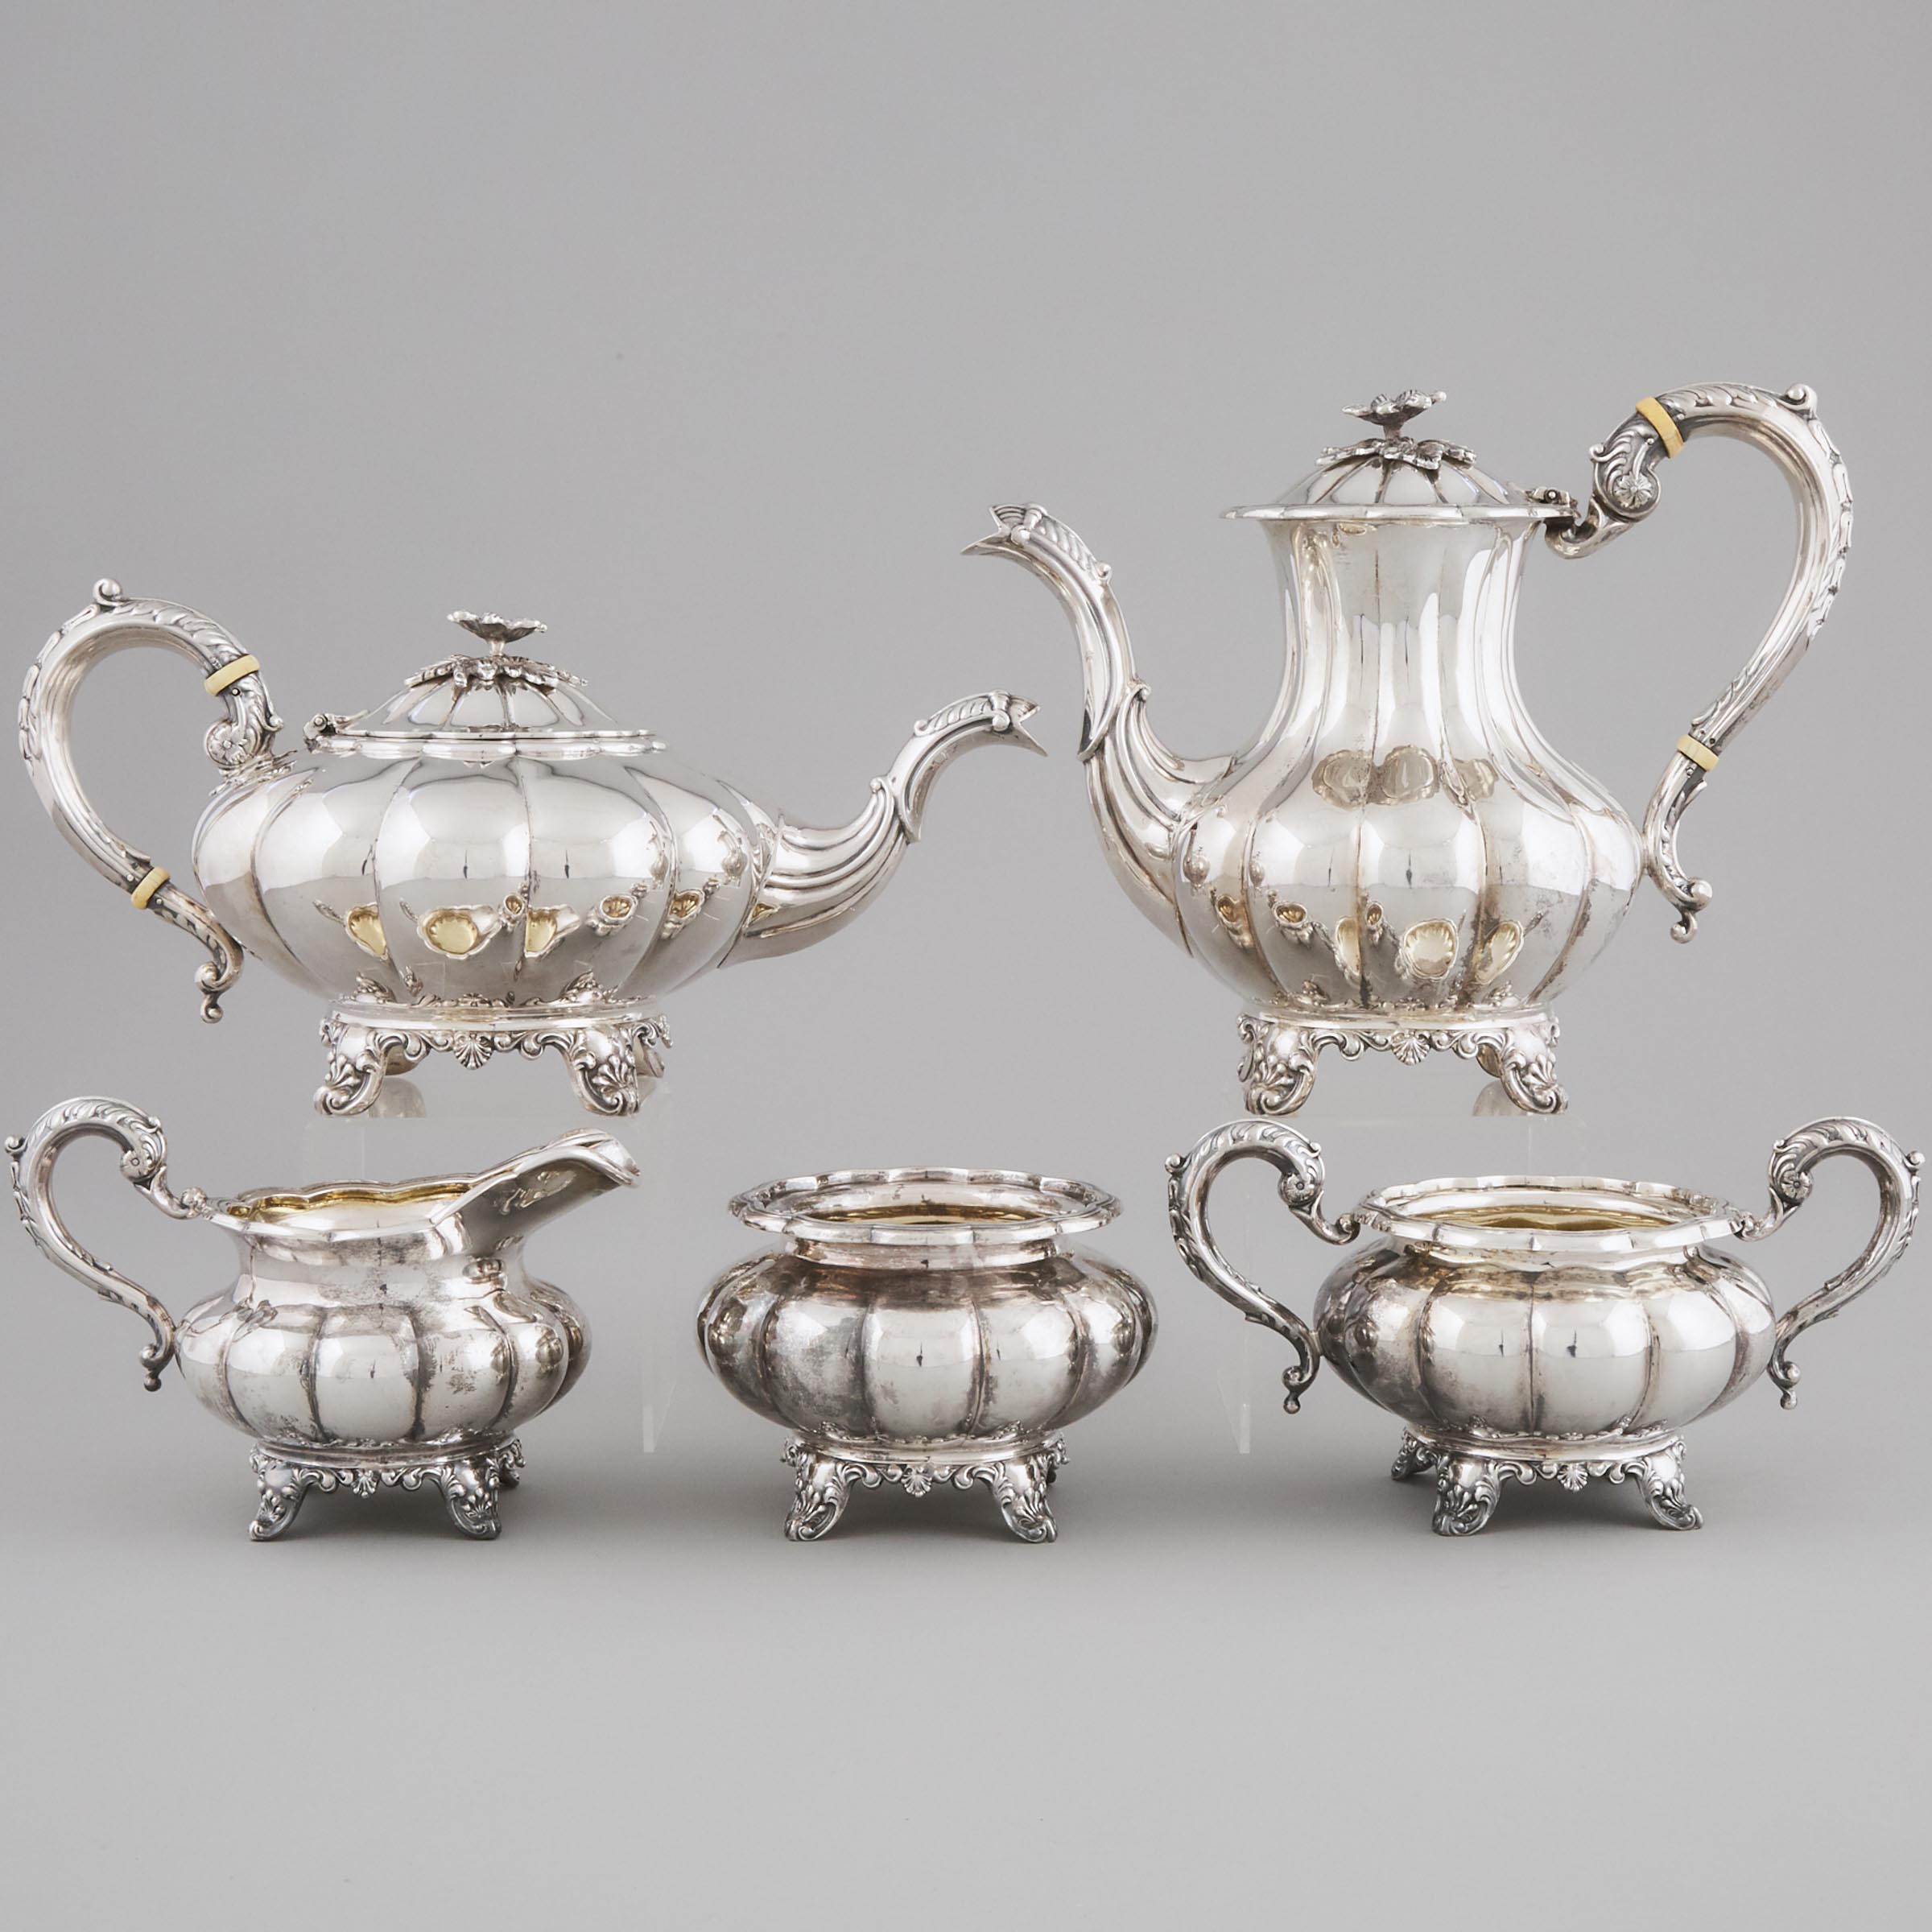 Canadian Silver Tea and Coffee Service, Henry Birks & Sons, Montreal, Que., 1947/48